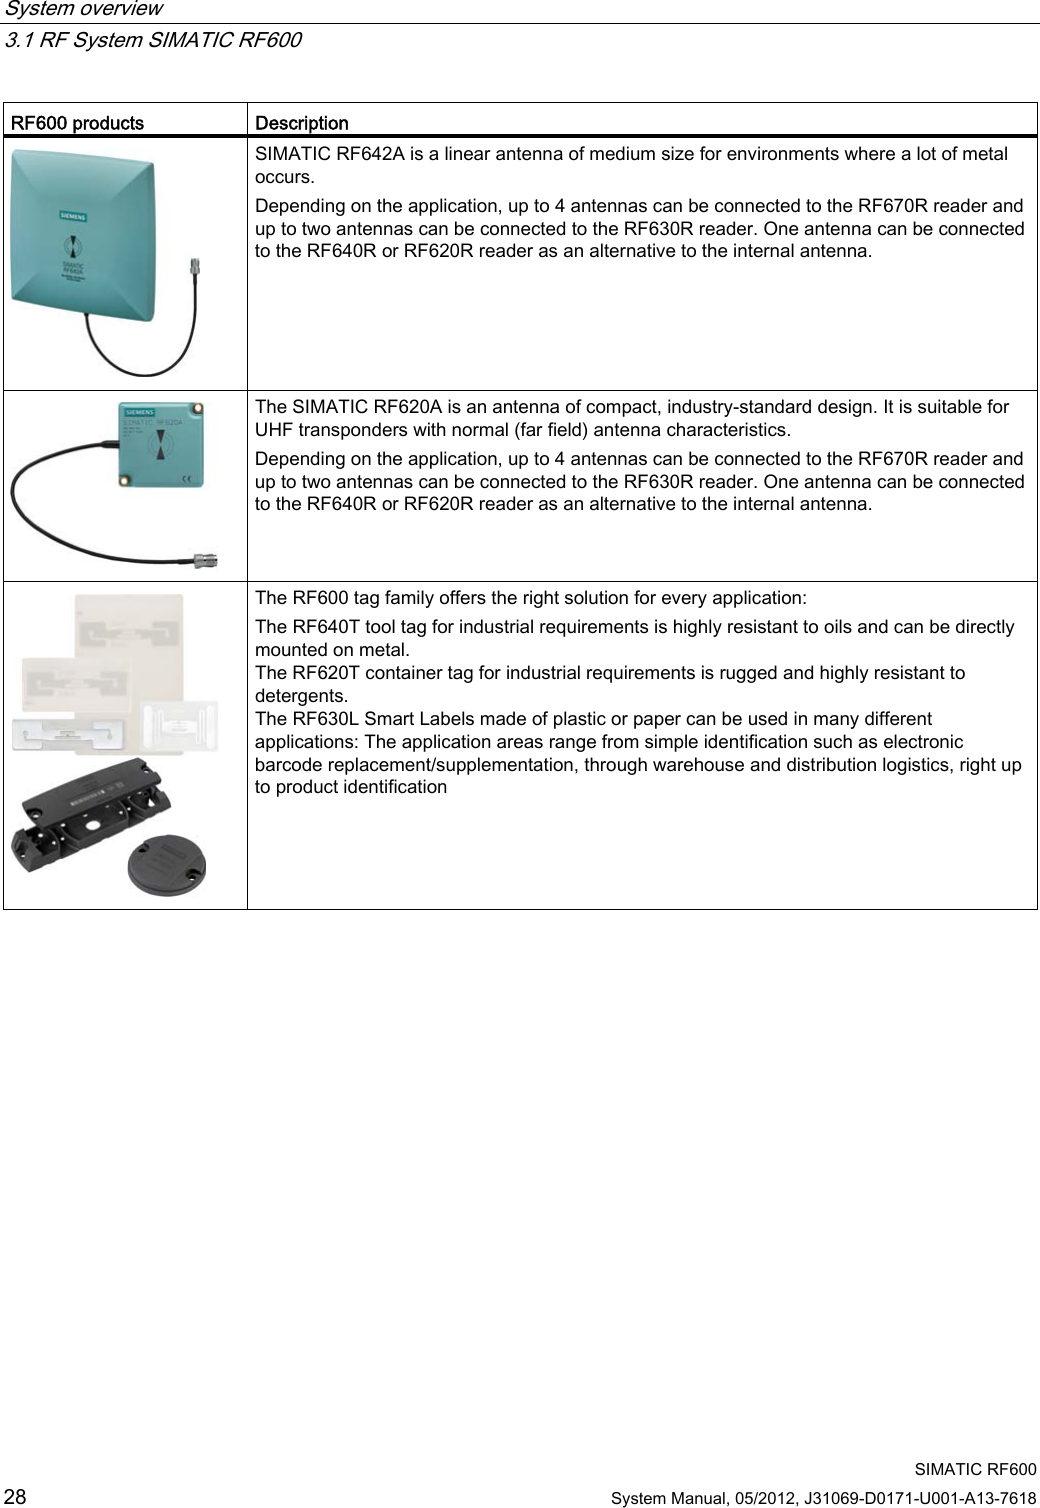 System overview   3.1 RF System SIMATIC RF600  SIMATIC RF600 28 System Manual, 05/2012, J31069-D0171-U001-A13-7618 RF600 products  Description  SIMATIC RF642A is a linear antenna of medium size for environments where a lot of metal occurs. Depending on the application, up to 4 antennas can be connected to the RF670R reader and up to two antennas can be connected to the RF630R reader. One antenna can be connected to the RF640R or RF620R reader as an alternative to the internal antenna.  The SIMATIC RF620A is an antenna of compact, industry-standard design. It is suitable for UHF transponders with normal (far field) antenna characteristics. Depending on the application, up to 4 antennas can be connected to the RF670R reader and up to two antennas can be connected to the RF630R reader. One antenna can be connected to the RF640R or RF620R reader as an alternative to the internal antenna.  The RF600 tag family offers the right solution for every application: The RF640T tool tag for industrial requirements is highly resistant to oils and can be directly mounted on metal.  The RF620T container tag for industrial requirements is rugged and highly resistant to detergents.  The RF630L Smart Labels made of plastic or paper can be used in many different applications: The application areas range from simple identification such as electronic barcode replacement/supplementation, through warehouse and distribution logistics, right up to product identification 